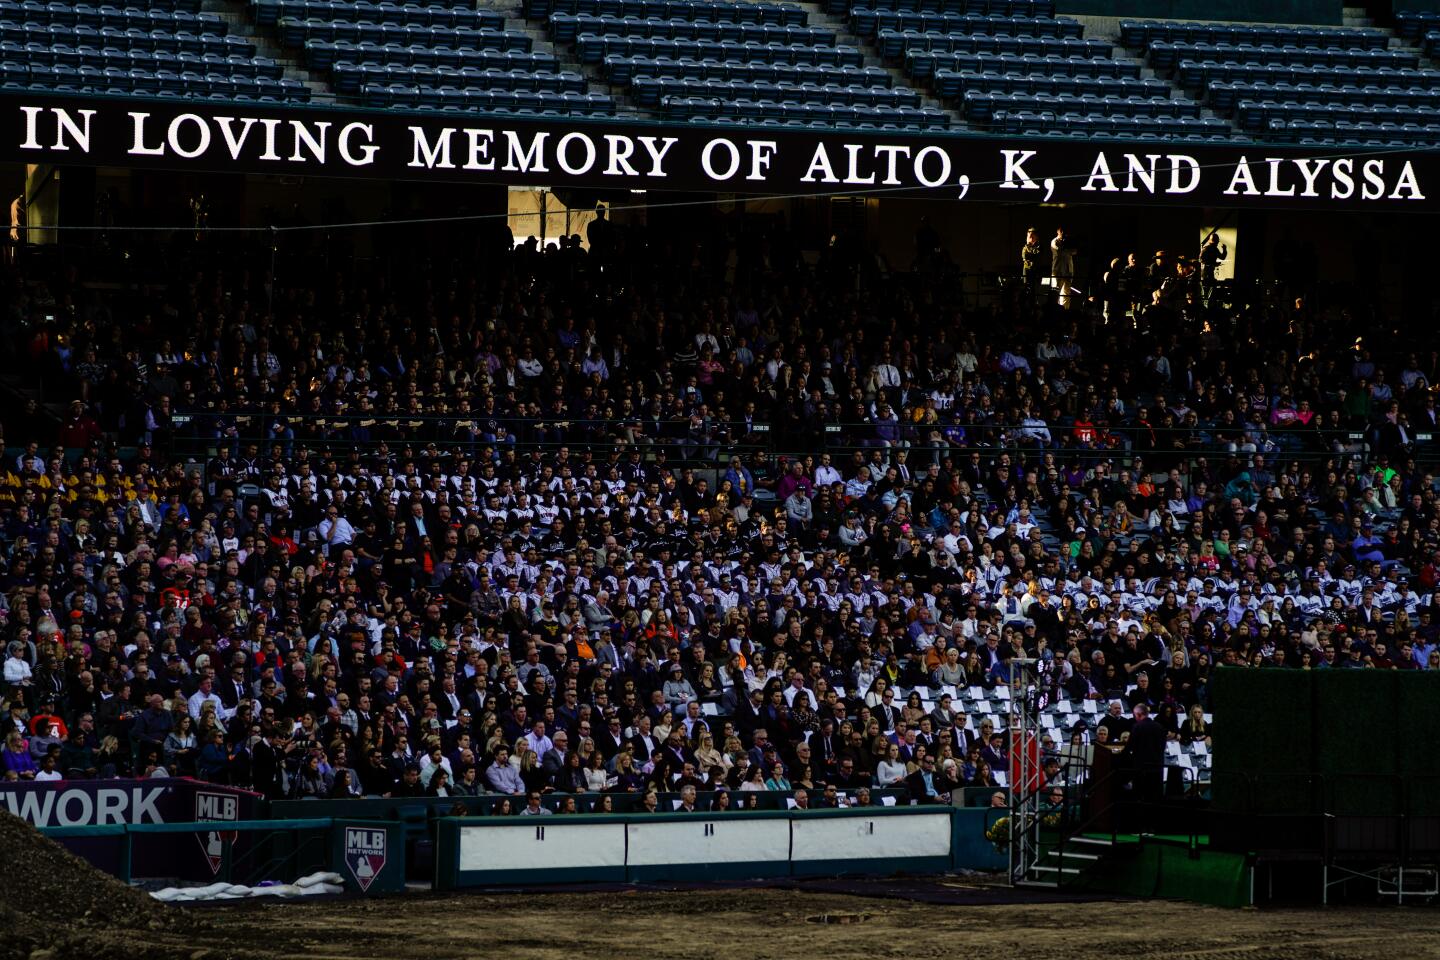 People in the seats during a celebration of life ceremony at Angel Stadium on Monday to honor the lives of John, Keri and Alyssa Altobelli.